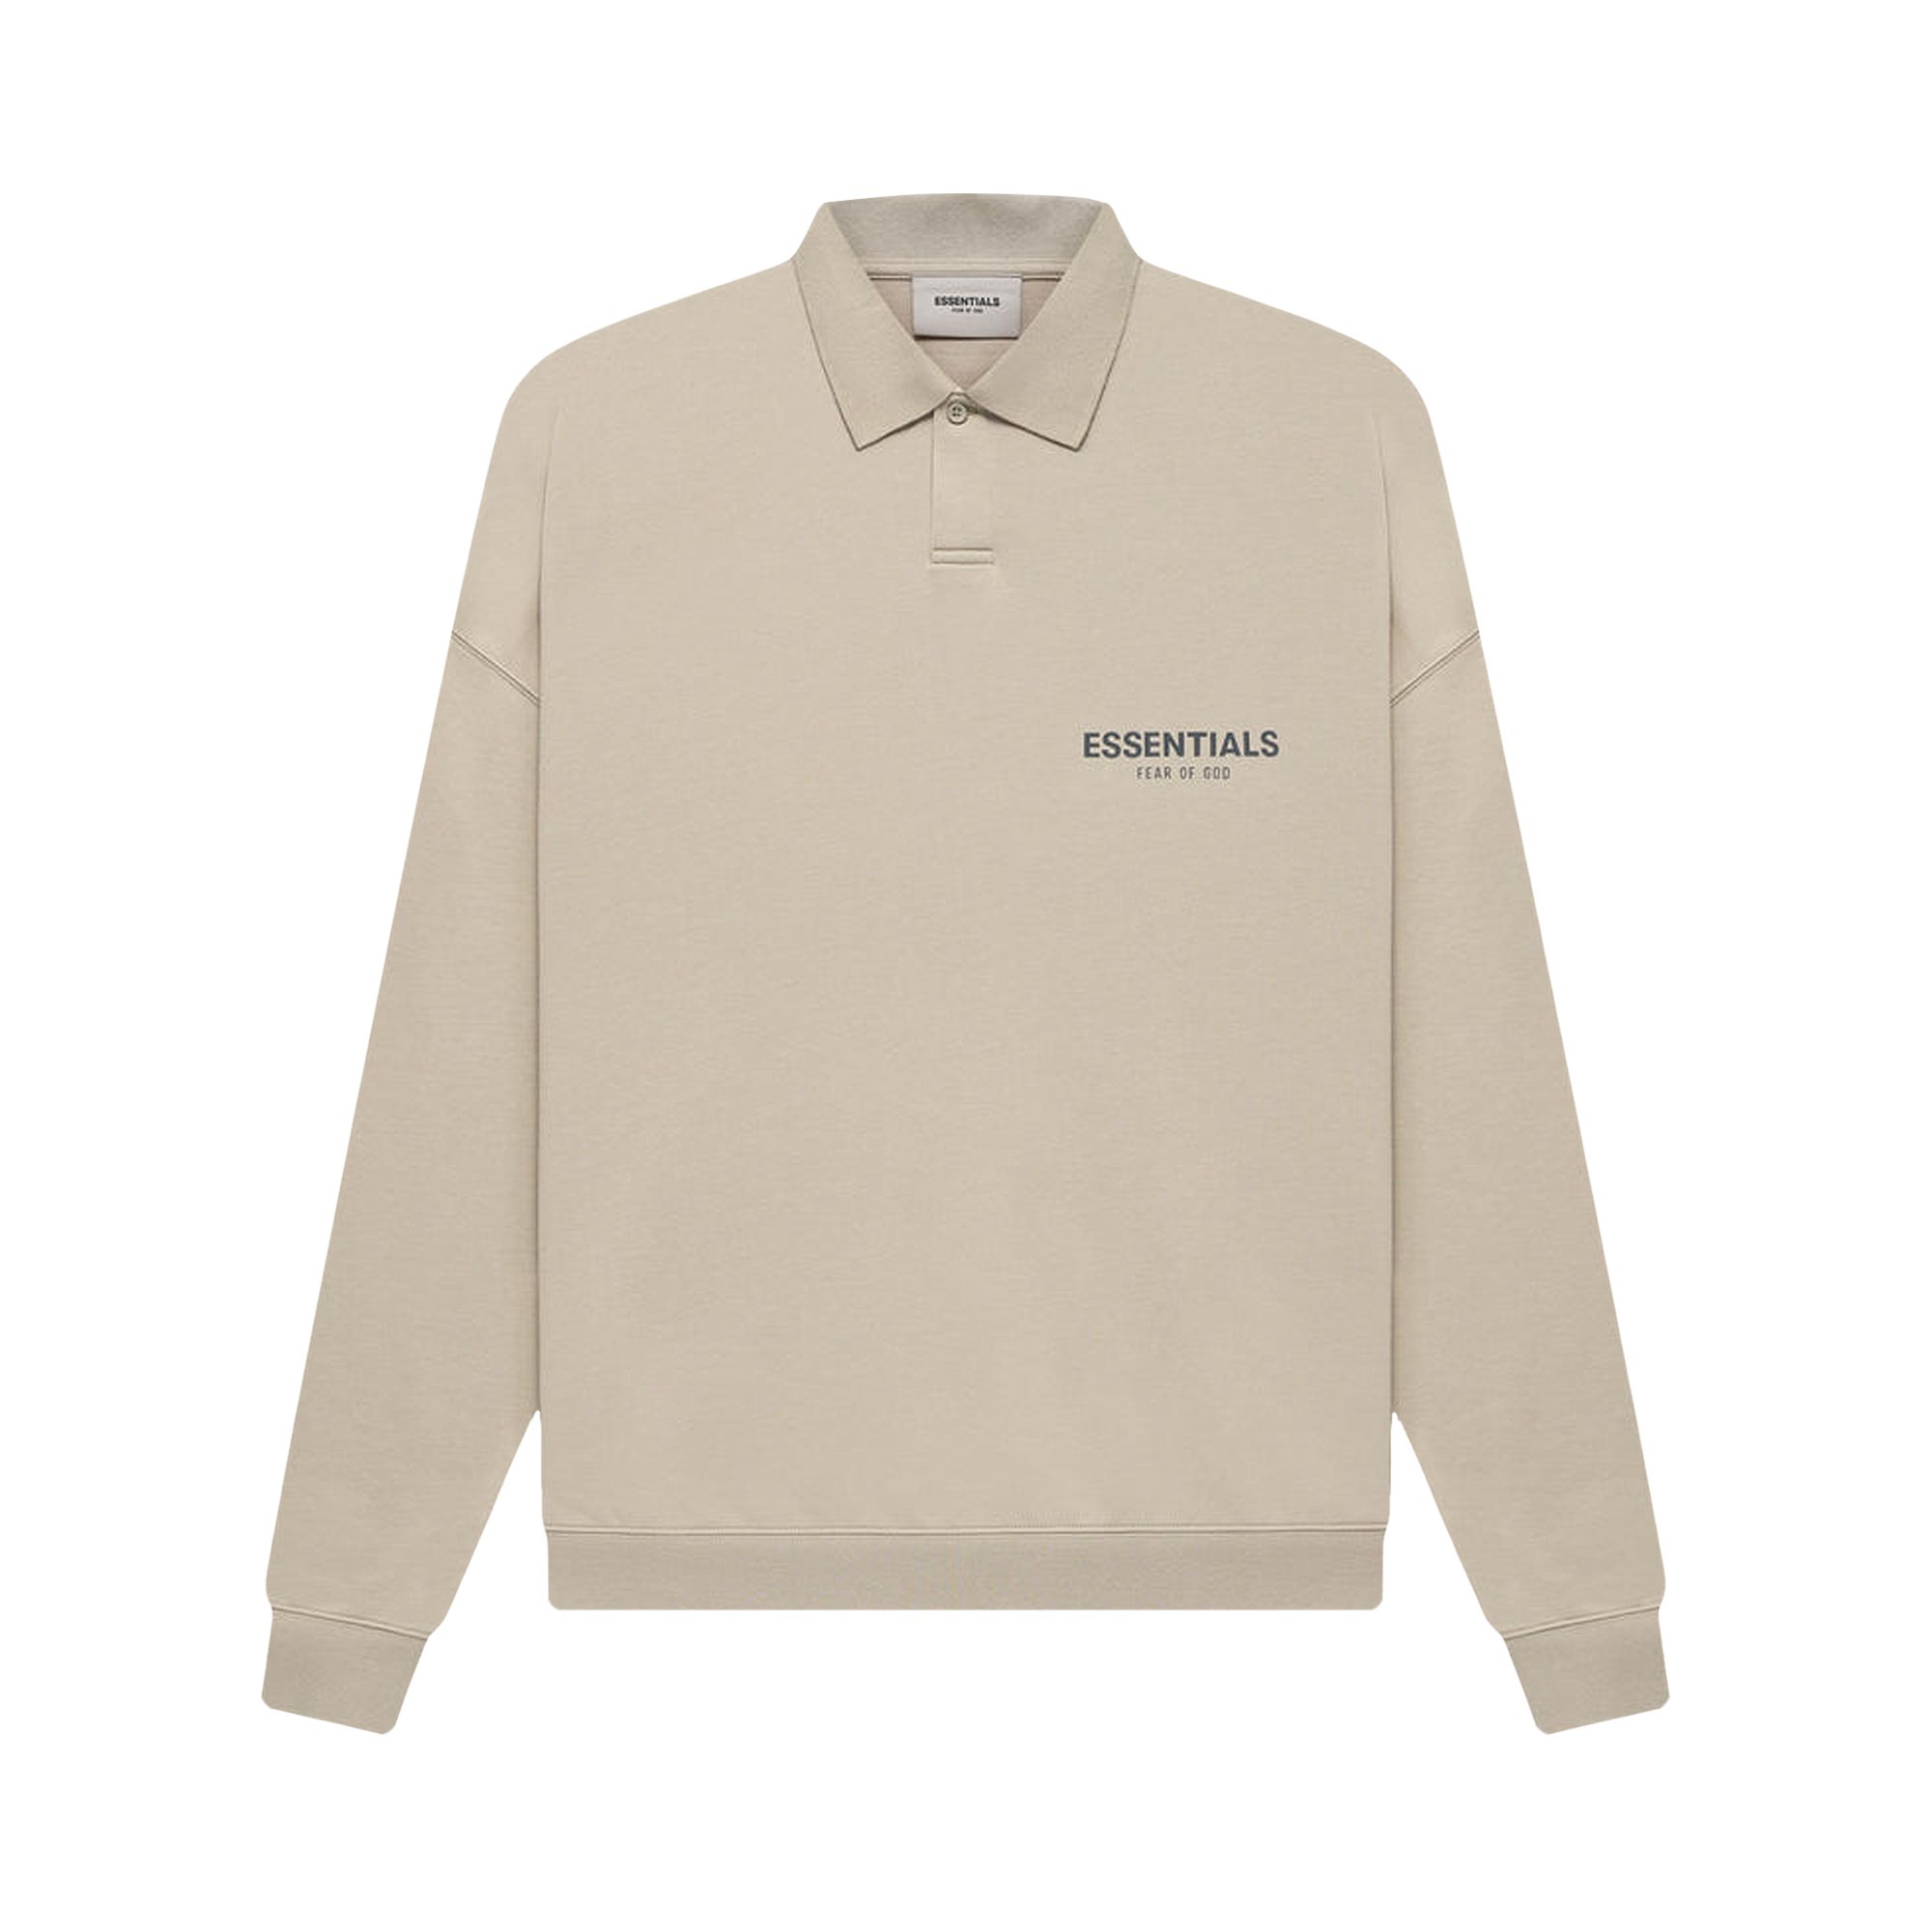 Fear of God Essentials Long-Sleeve Polo 'String' | GOAT